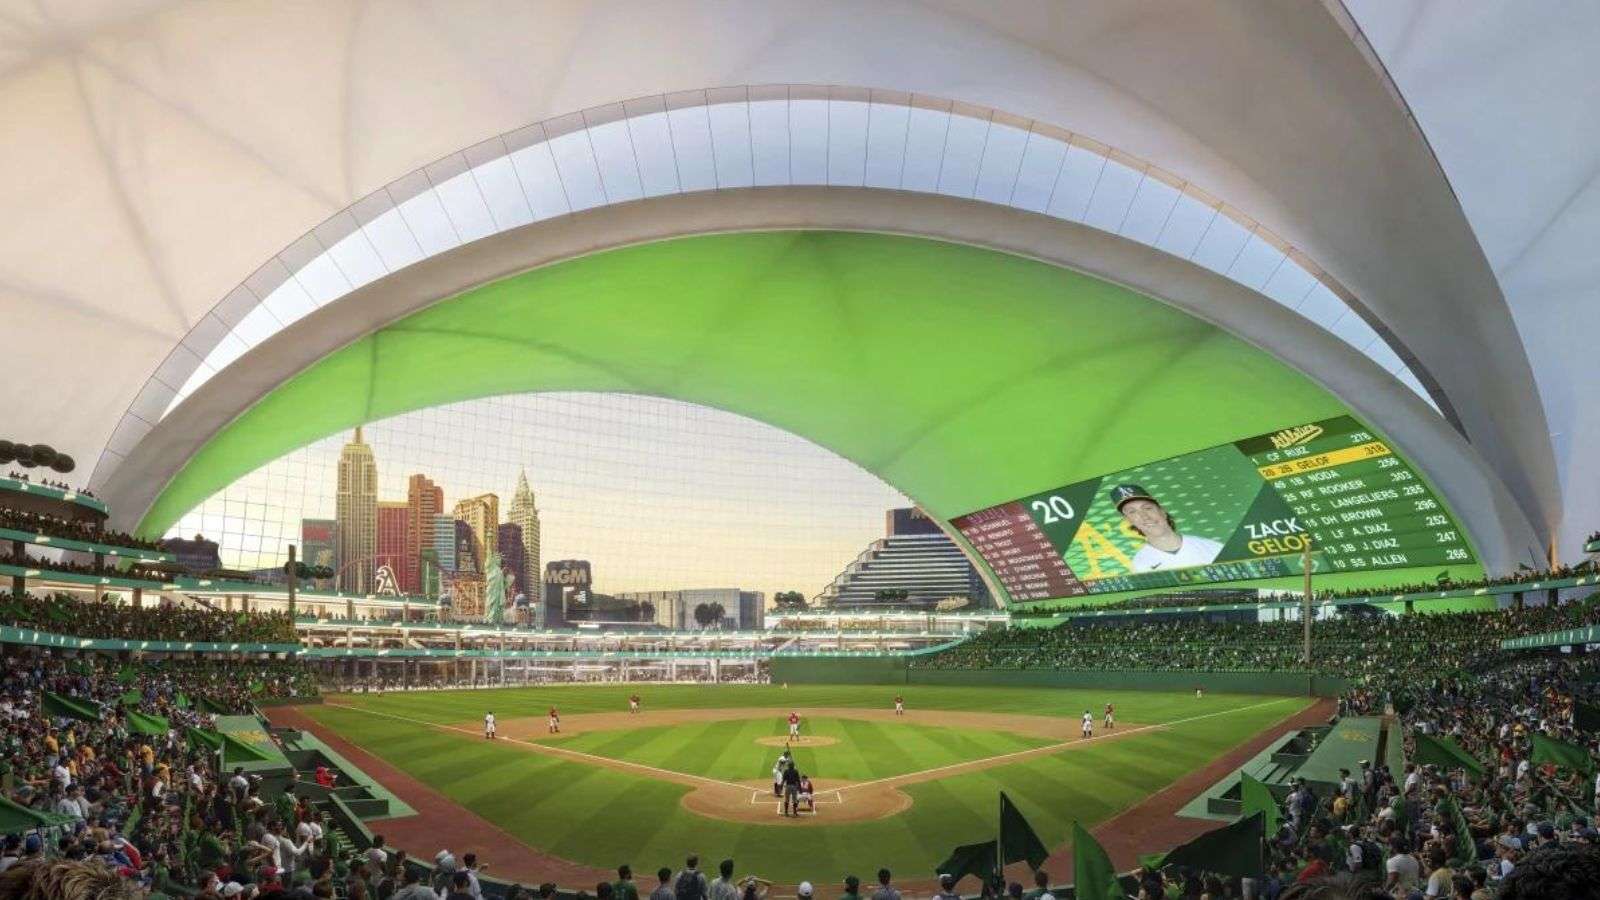 A rendering of the Oakland Athletics' new home venue being constructed in Las Vegas.